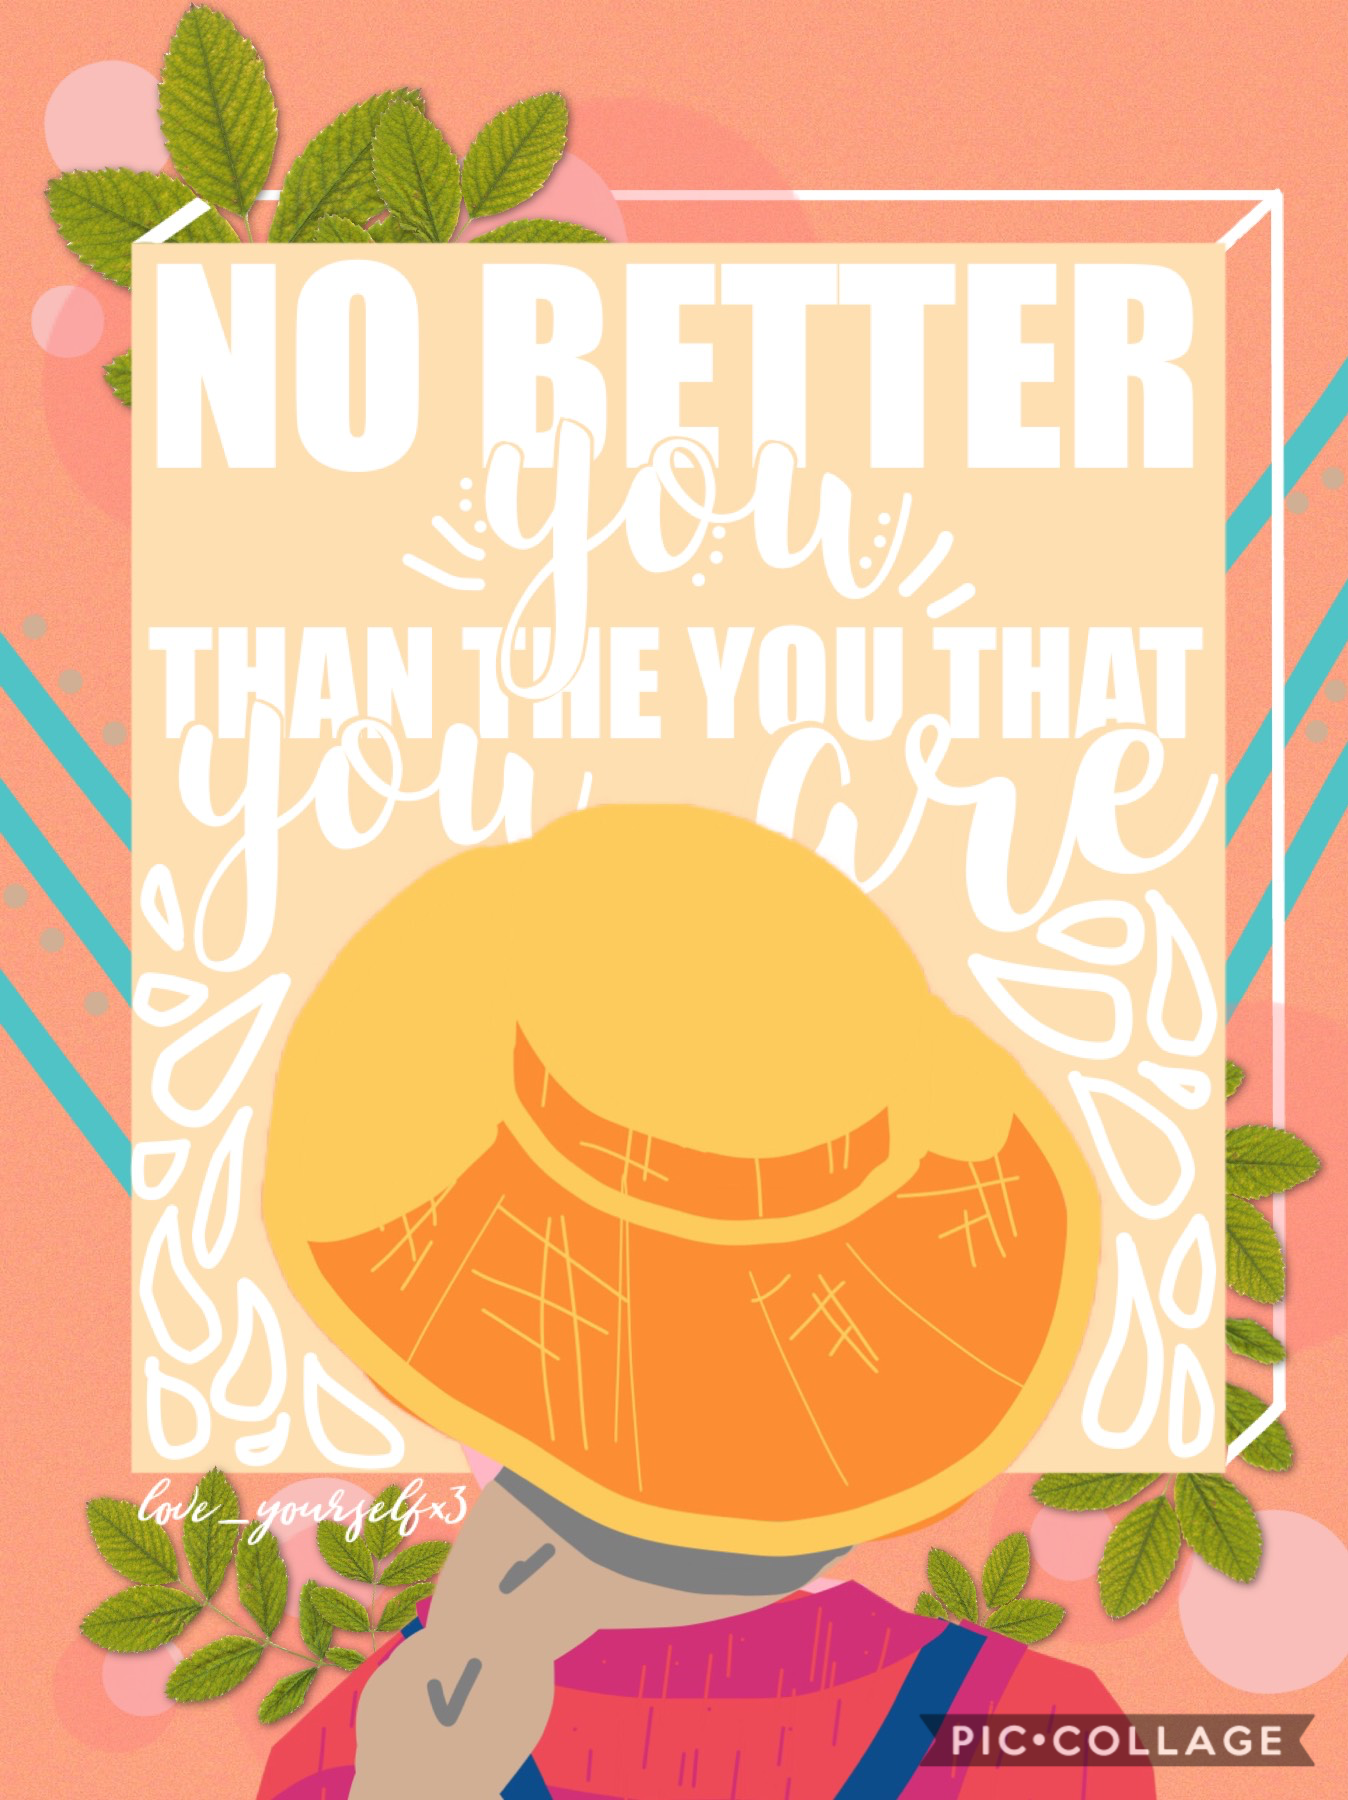 <daily dose of positivity> 🌸tap!🌸

Lyrics from “Scars To Your Beautiful” by Alessia Cara!

Love this songgg

Qotd: what’s your fave yt channel?

Aotd: vox hahaha I’m rather boring-